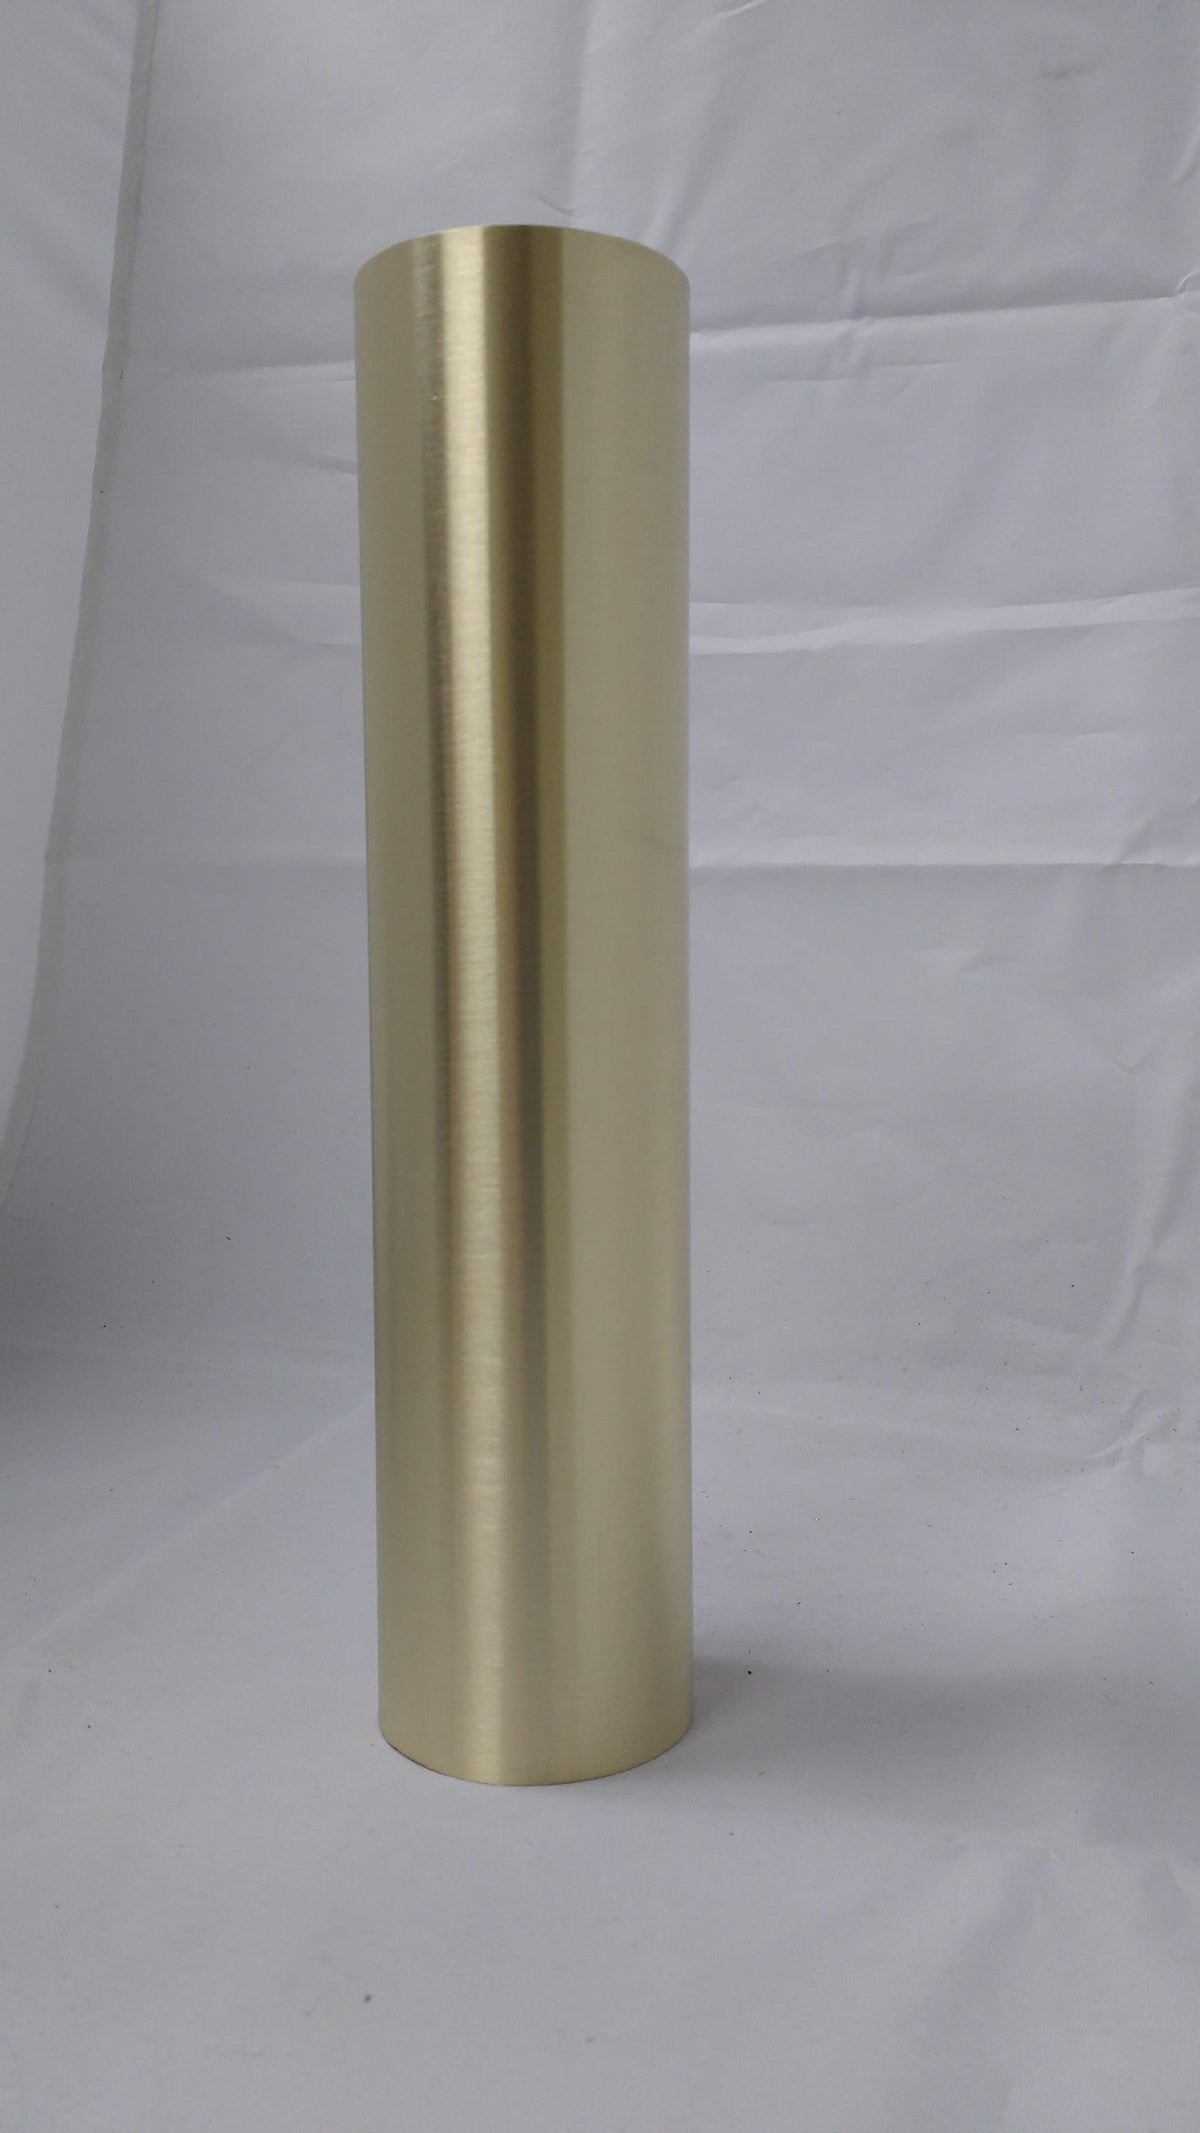 1" Diameter X .050 Wall Tubing - Order By The Foot Tubing & U-channels, Components for 1" Od Tubing, Drapery Hardware BrushedBrass907-12ftviaUPSonly Trade Diversified